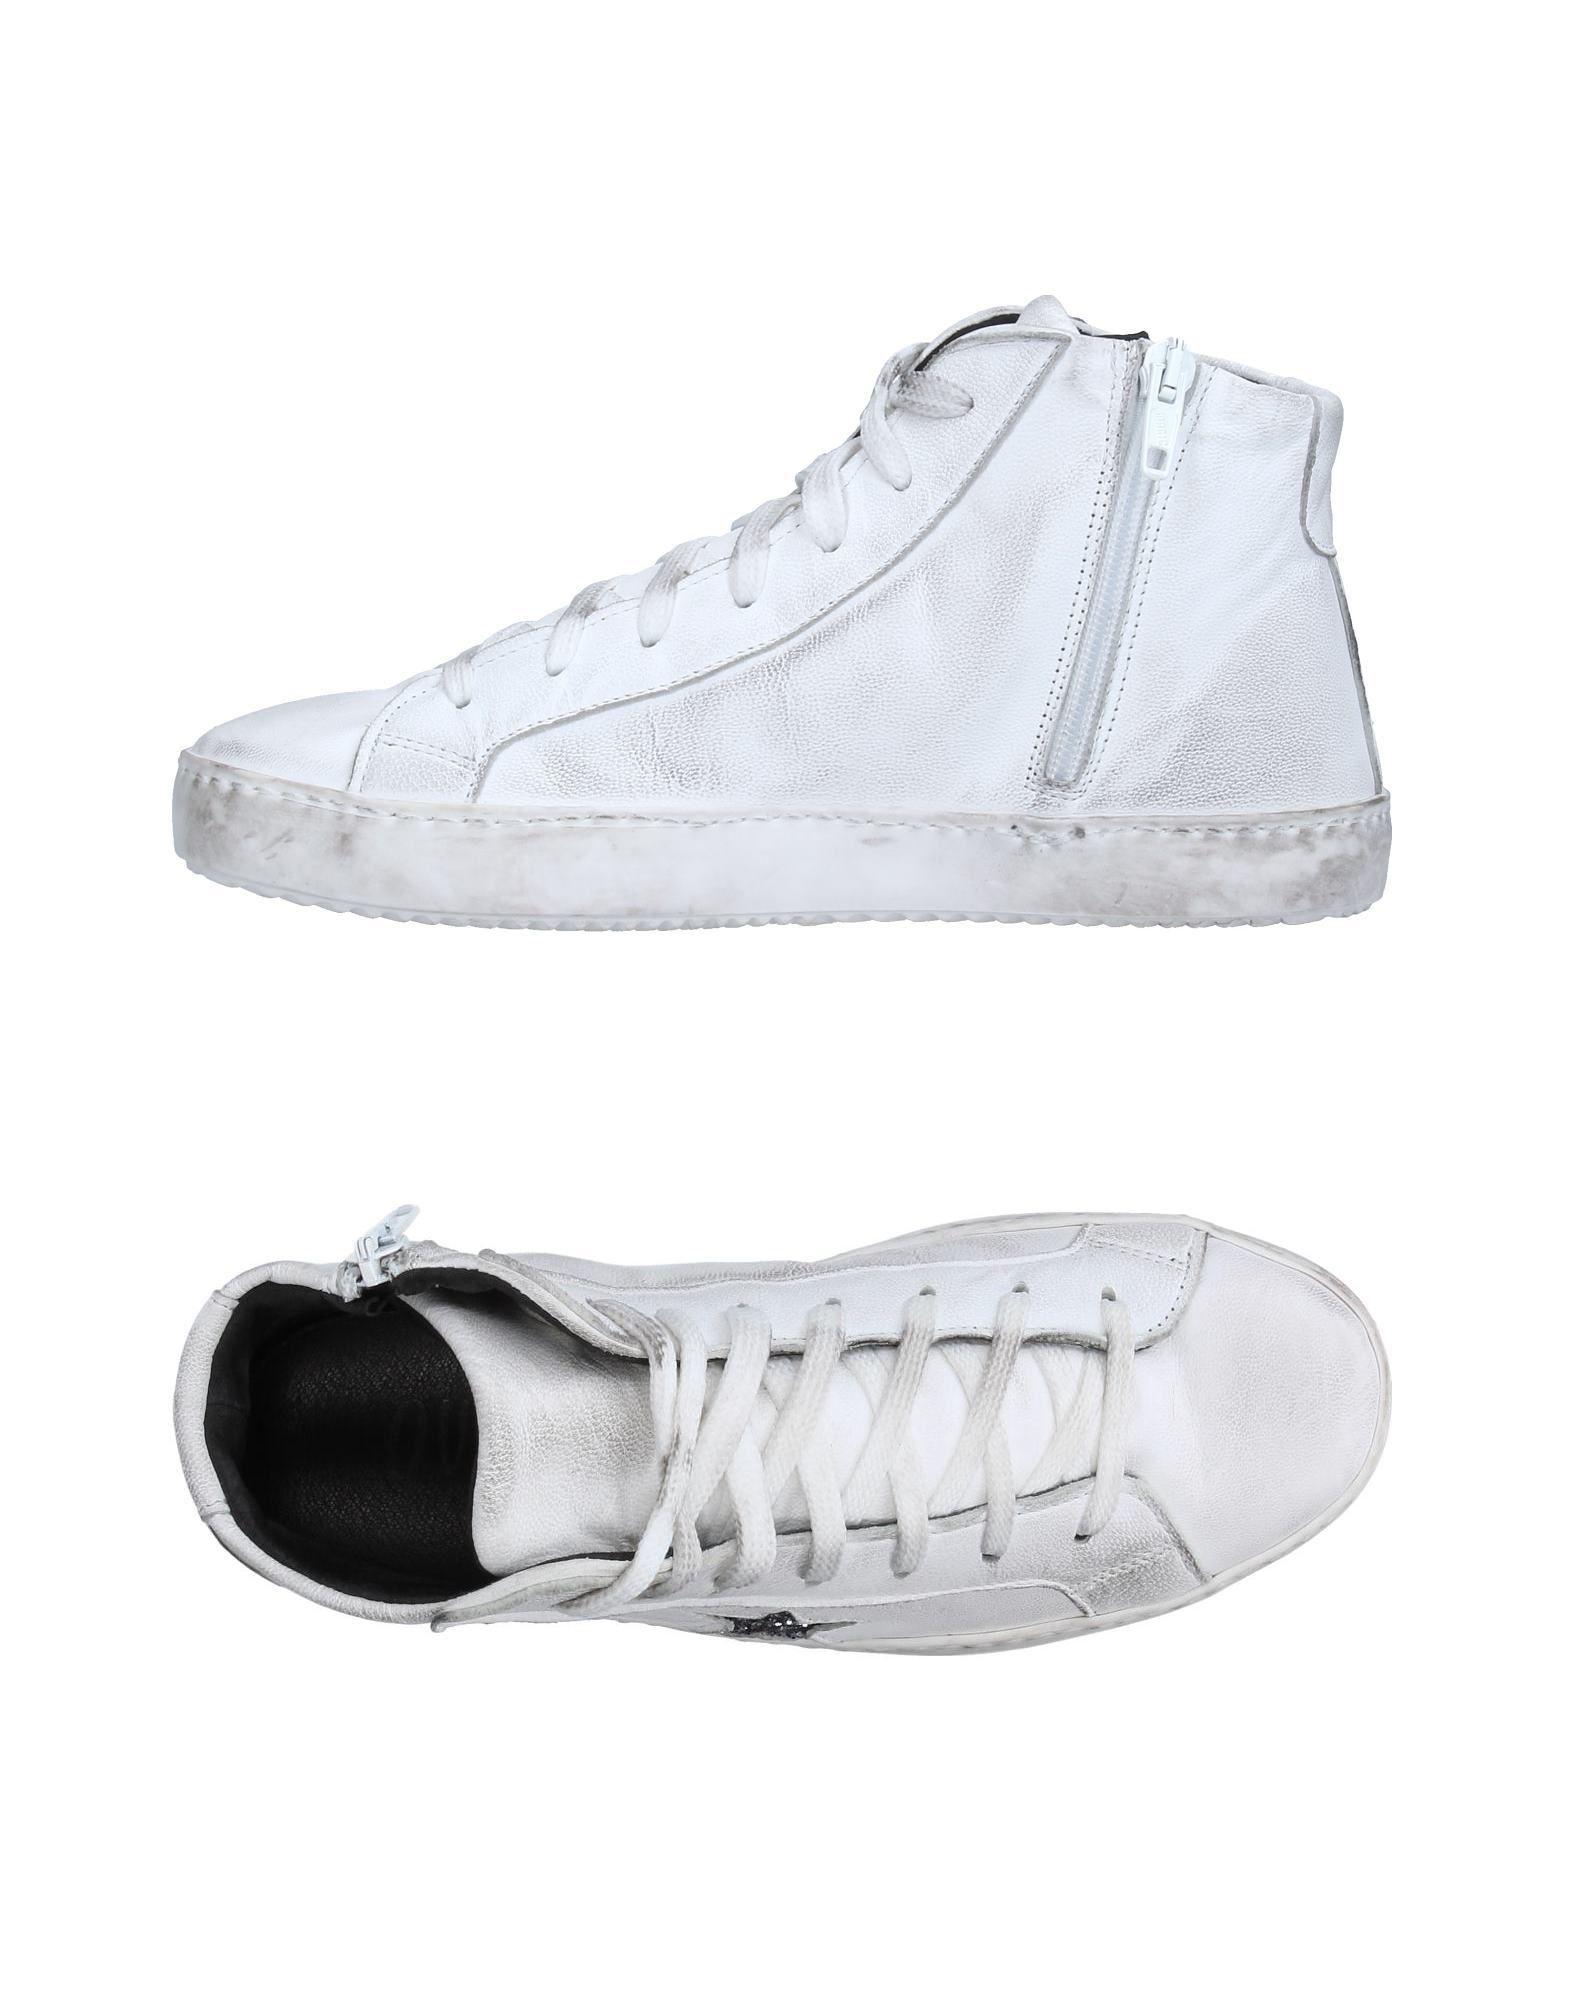 Ovye' By Cristina Lucchi Leather High-tops & Sneakers in White - Lyst